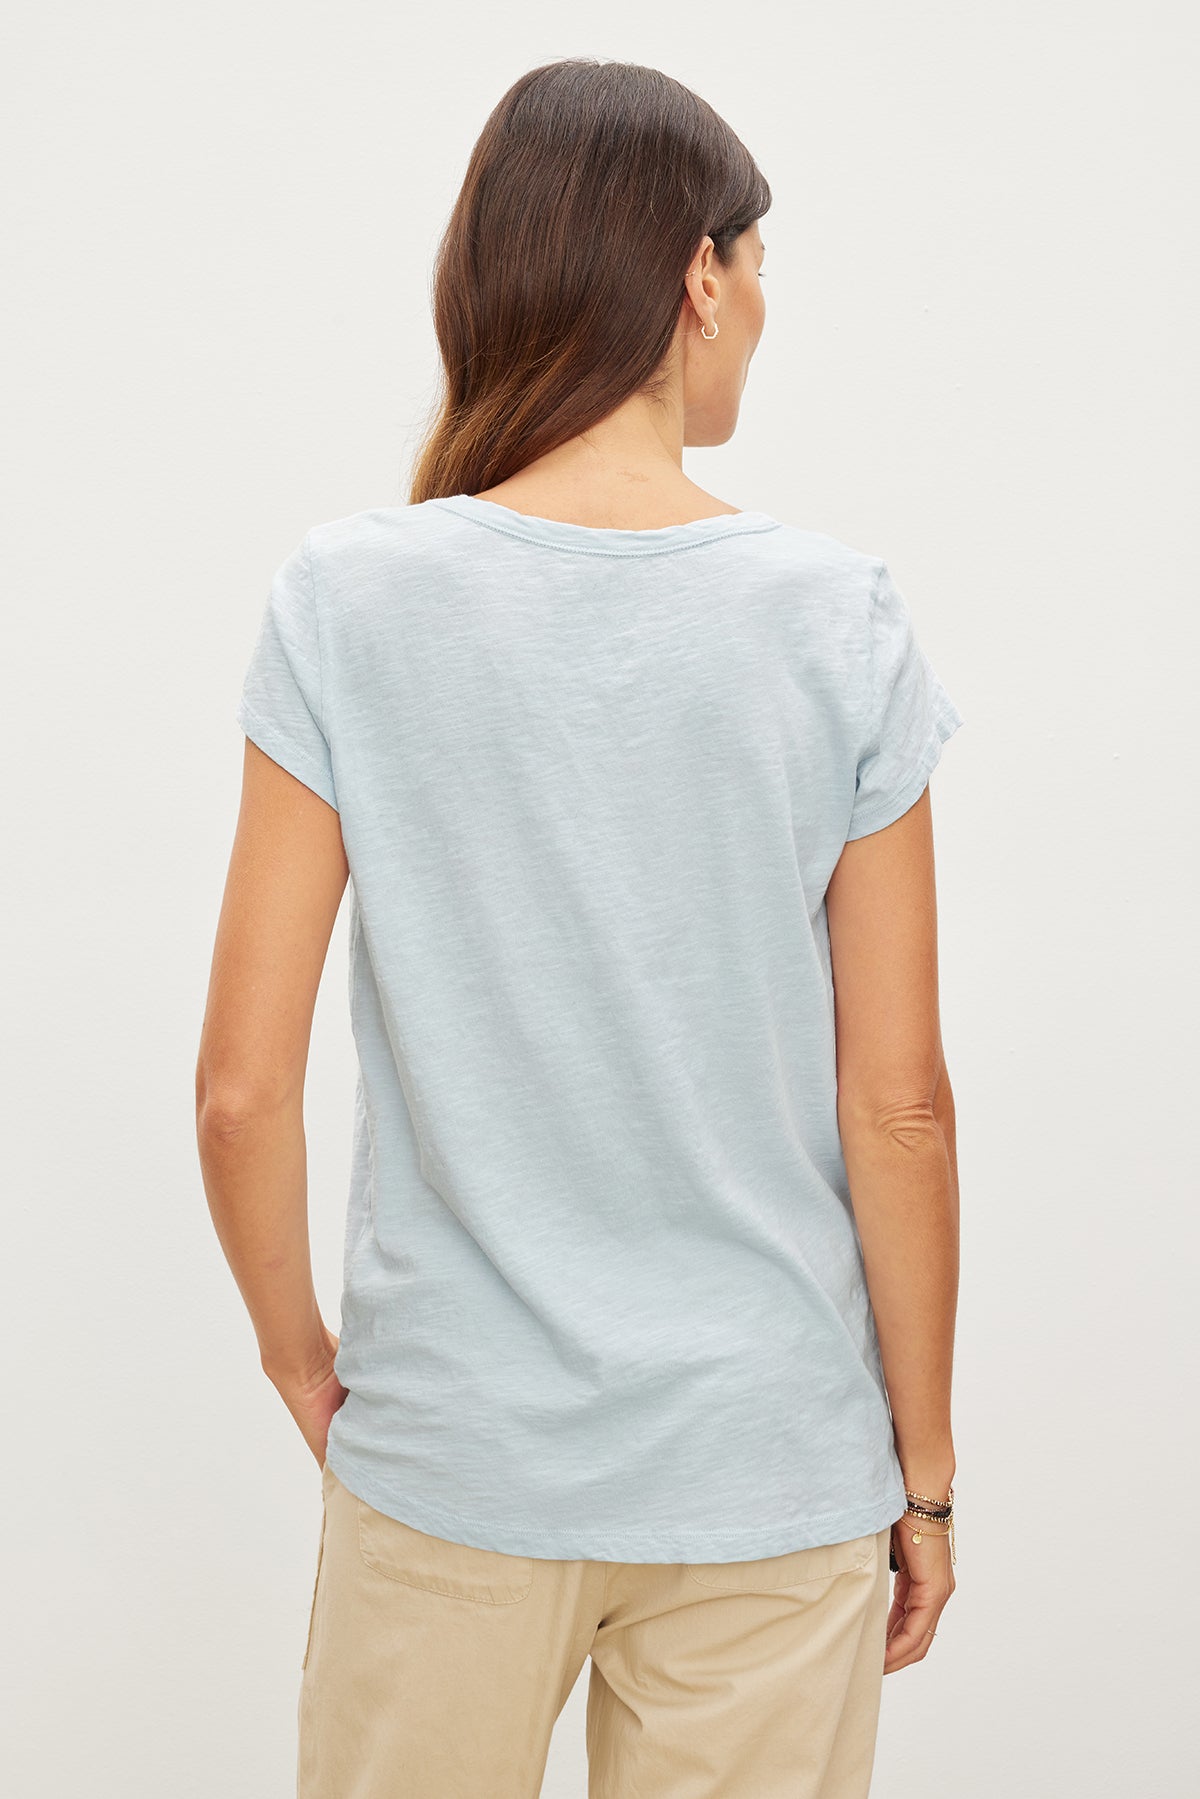 Woman viewed from behind, wearing a light blue Velvet by Graham & Spencer KIRA ORIGINAL SLUB SCOOP NECK TEE and beige pants, standing against a plain white background.-35982850457793